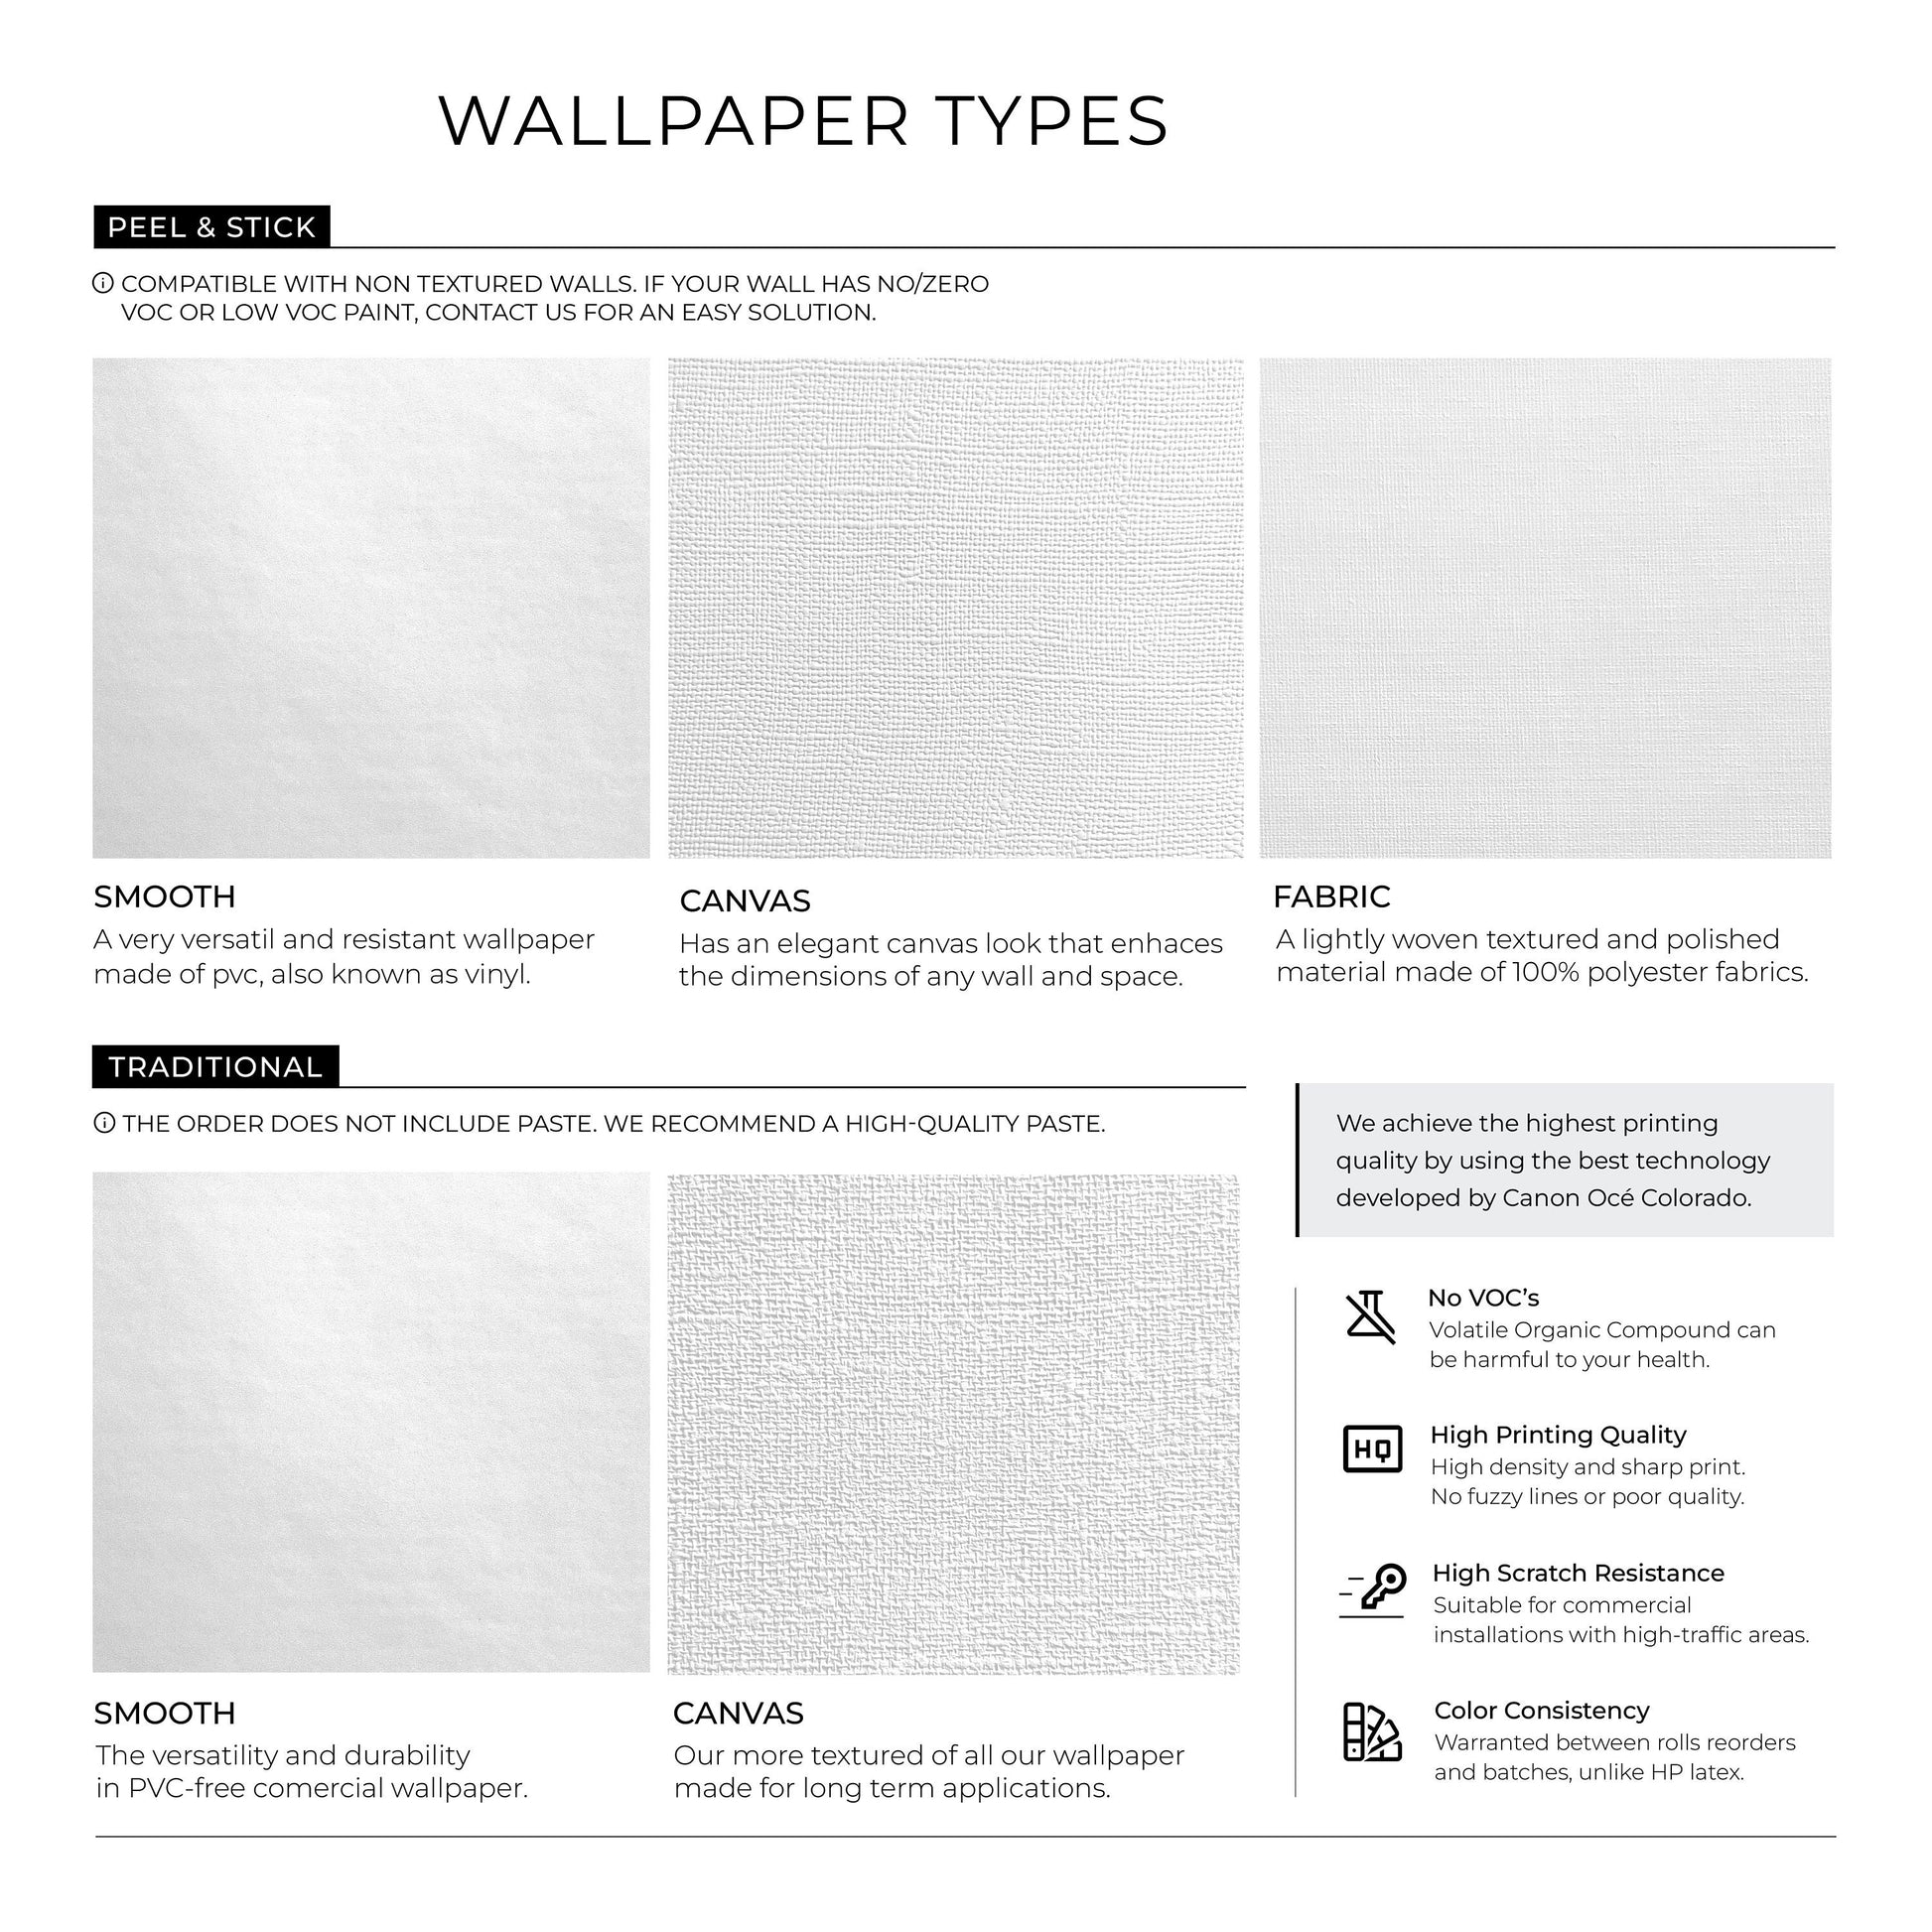 Removable Wallpaper Temporary Wallpaper Wallpaper Peel and Stick Wallpaper Wall Paper - A921